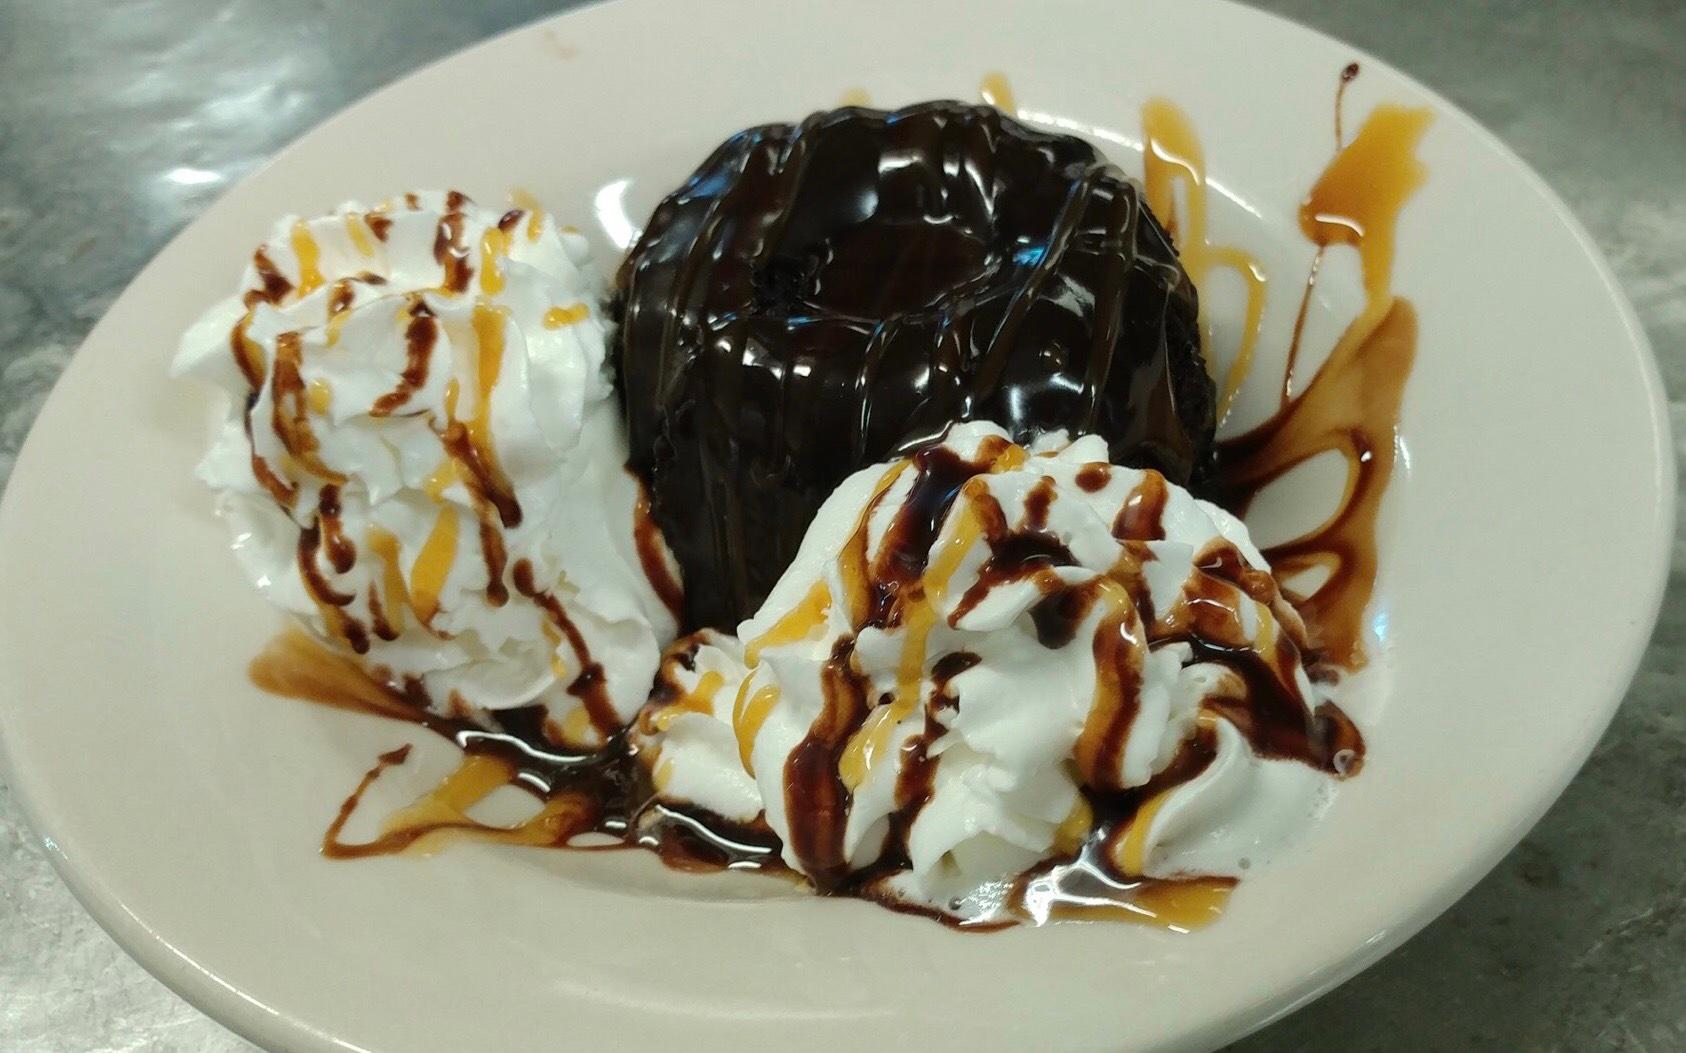 Molten lava cake from Mike's restaurant in Fairhaven, MA.